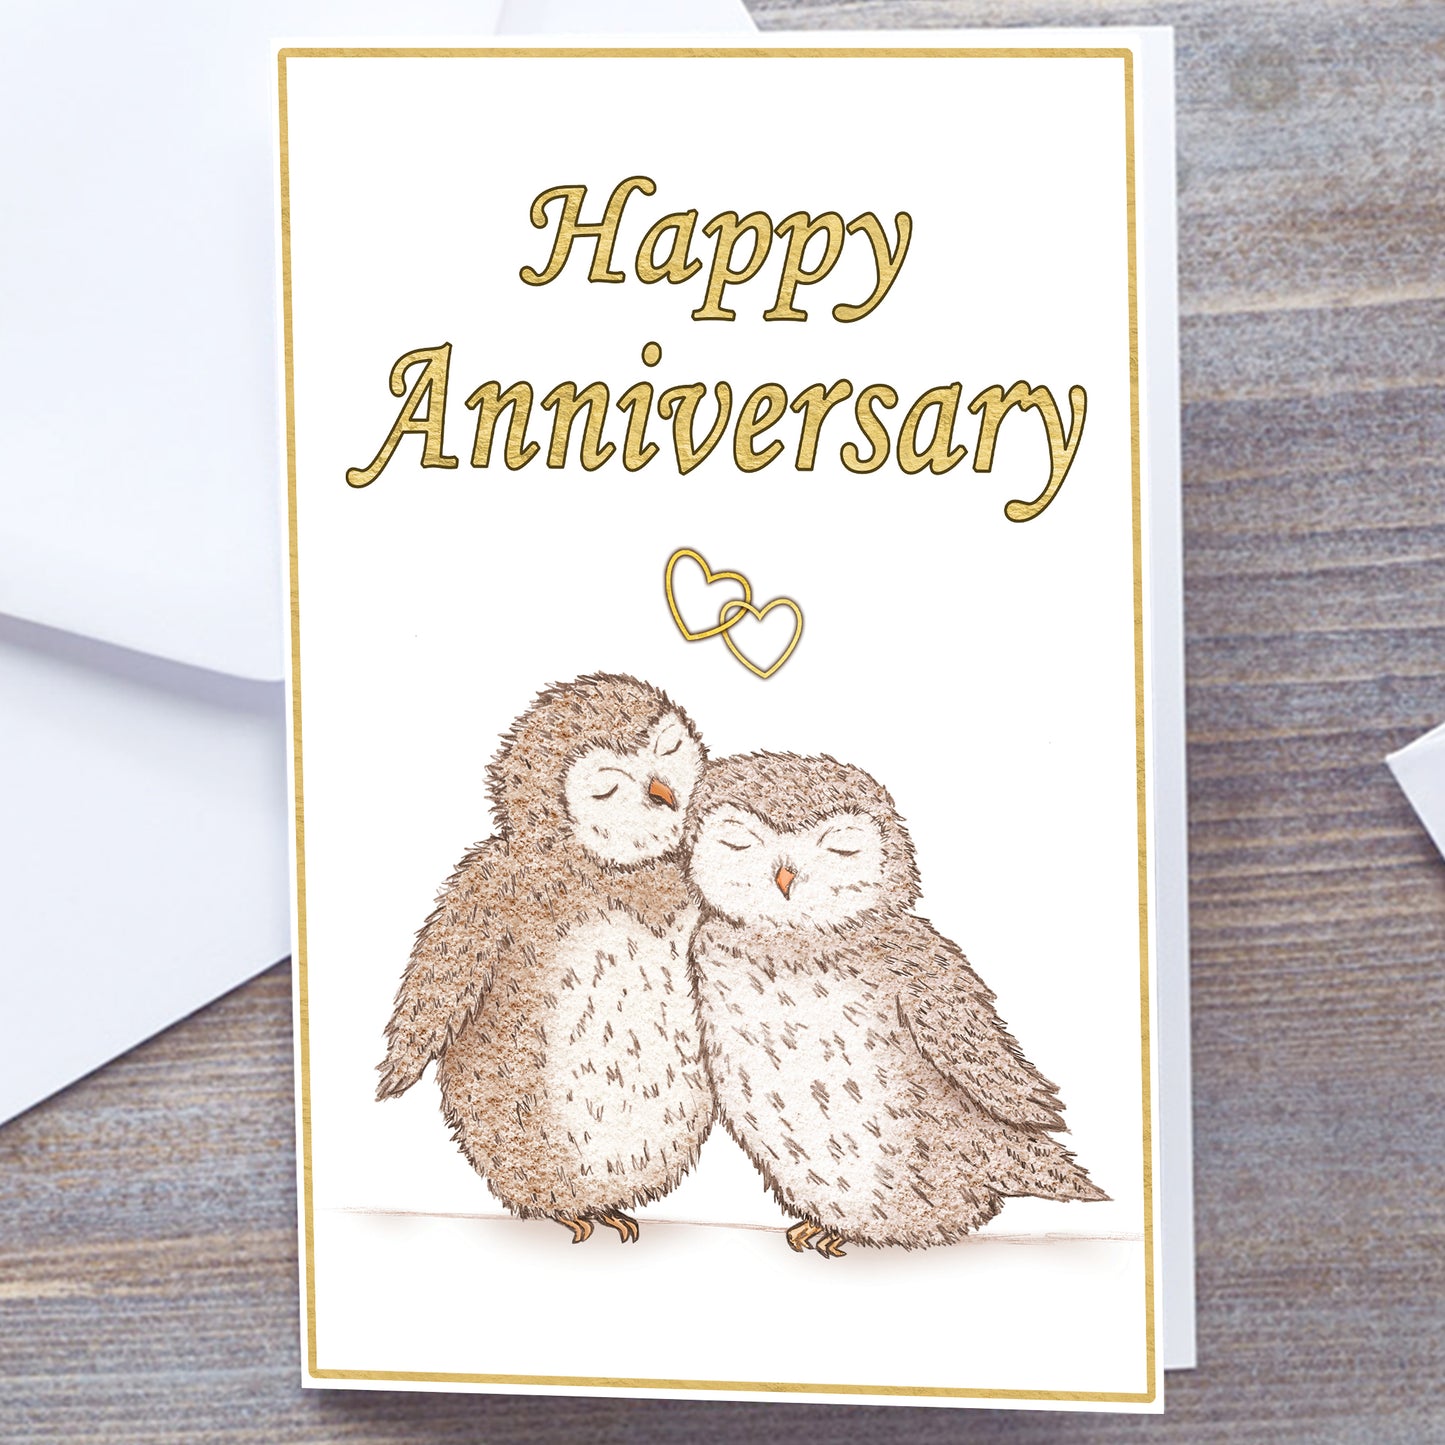 White gloss A5 Happy Anniversary Greeting card with gold text and border. Optional personalisation. Two hand-drawn fluffy brown and white owls snuggling under interlocking gold hearts. Happy Anniversary in Gold at top of card. Non-personalised option. Wedding Anniversary Card, white envelope